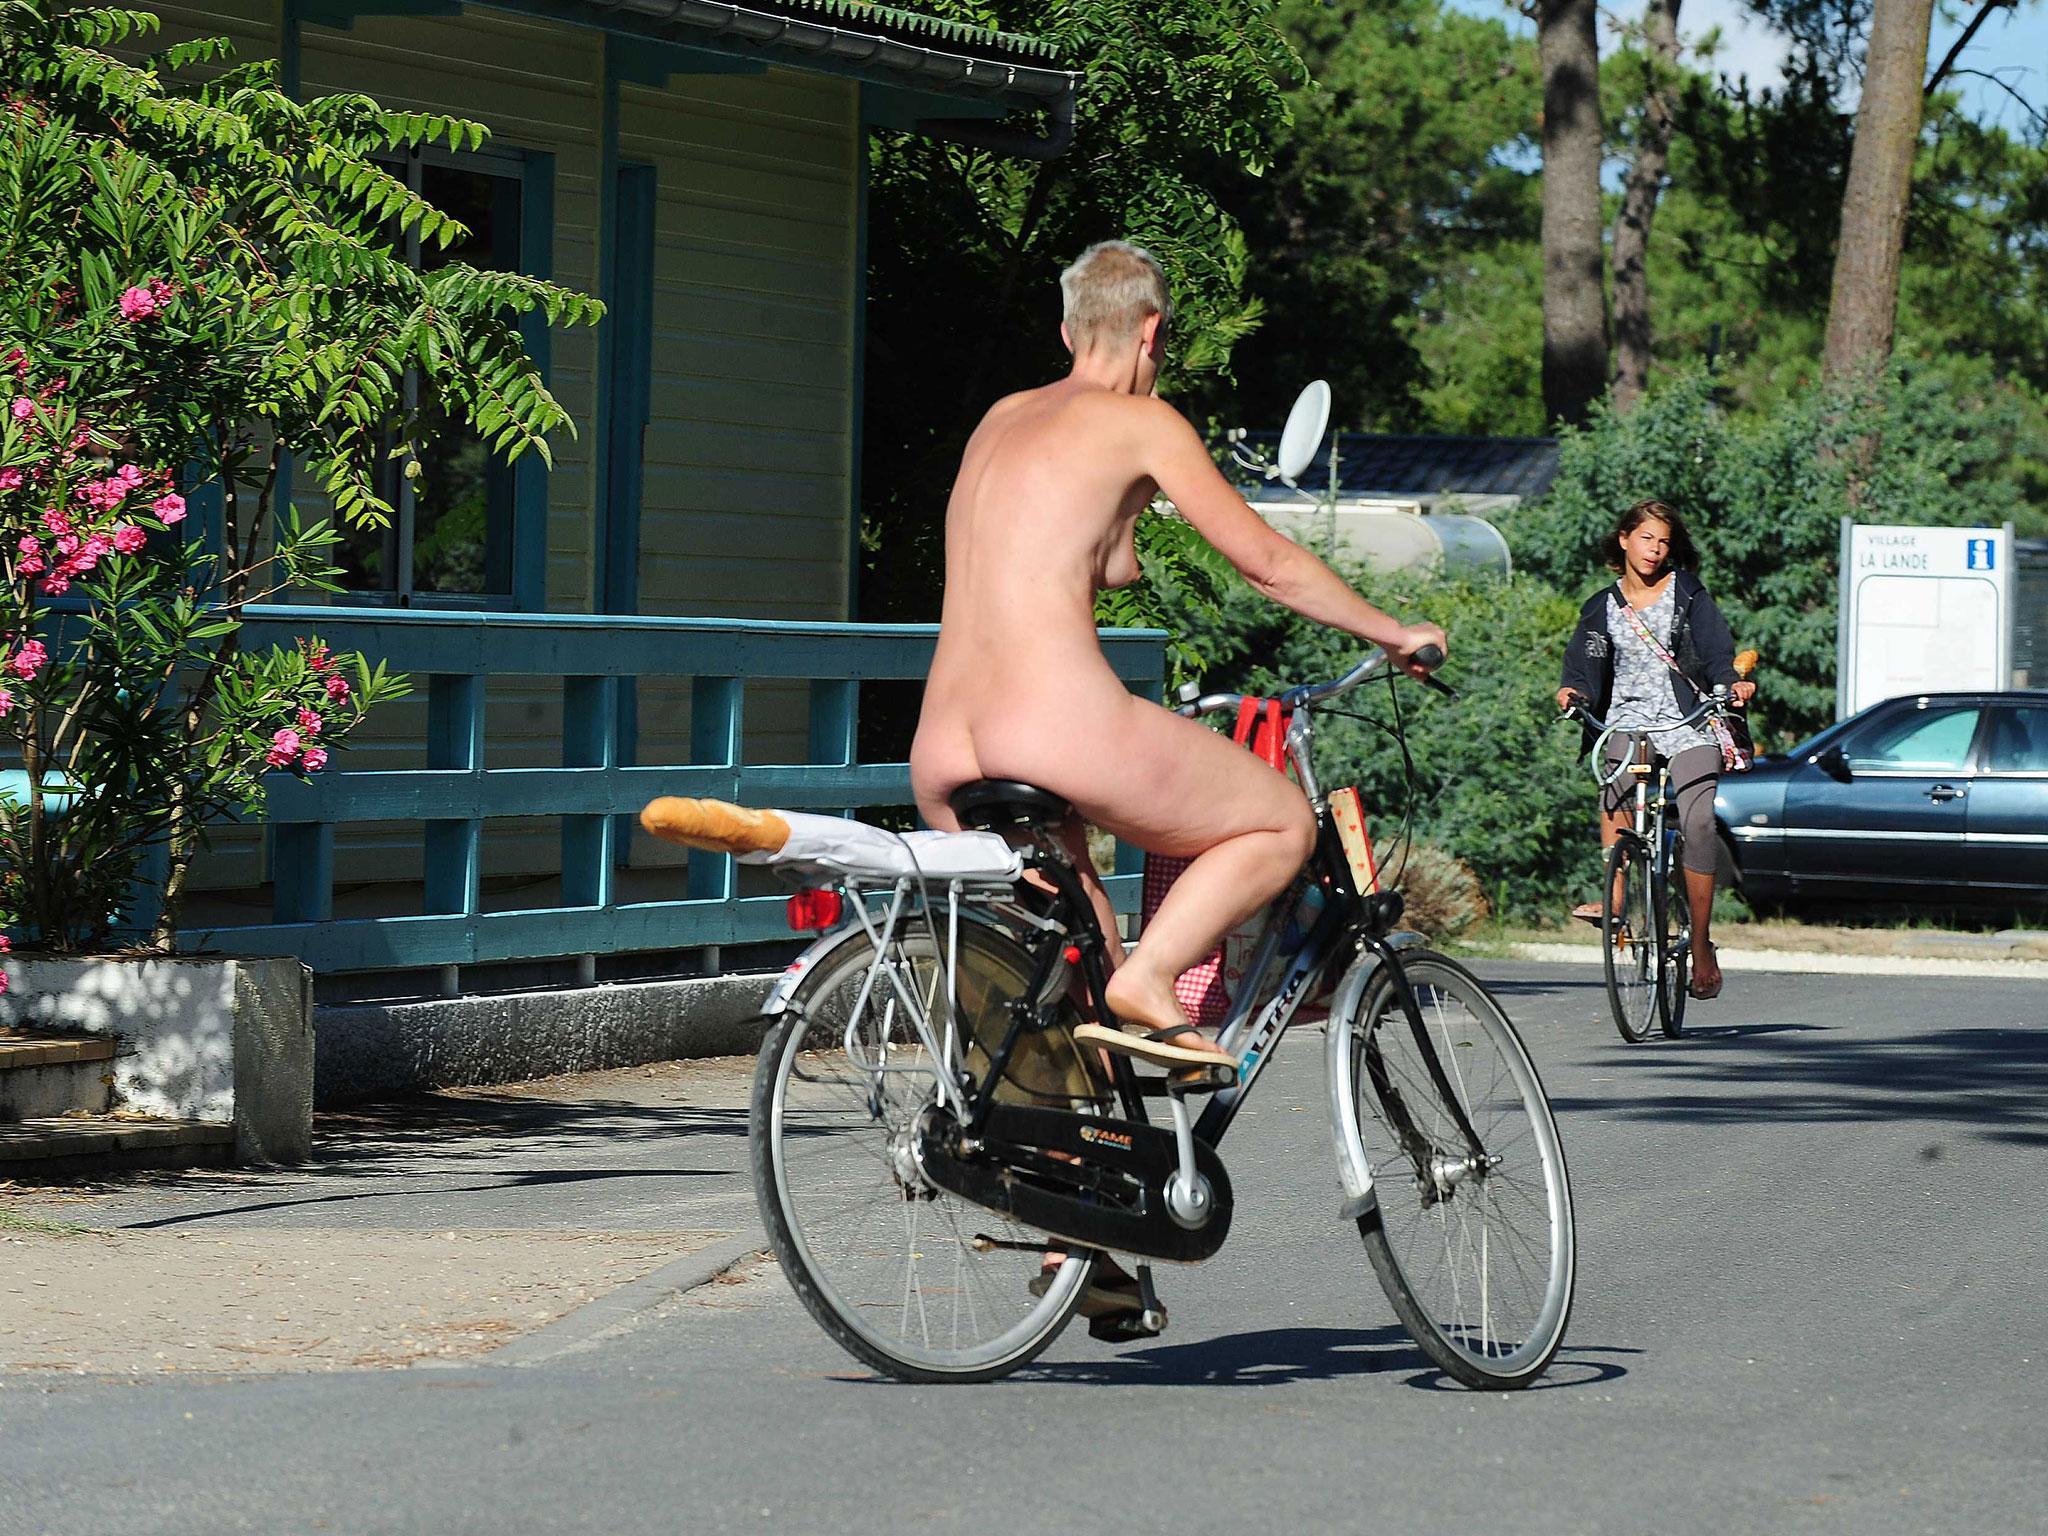 Paris nudists to get their own green space to roam in and hang out The Independent The Independent pic